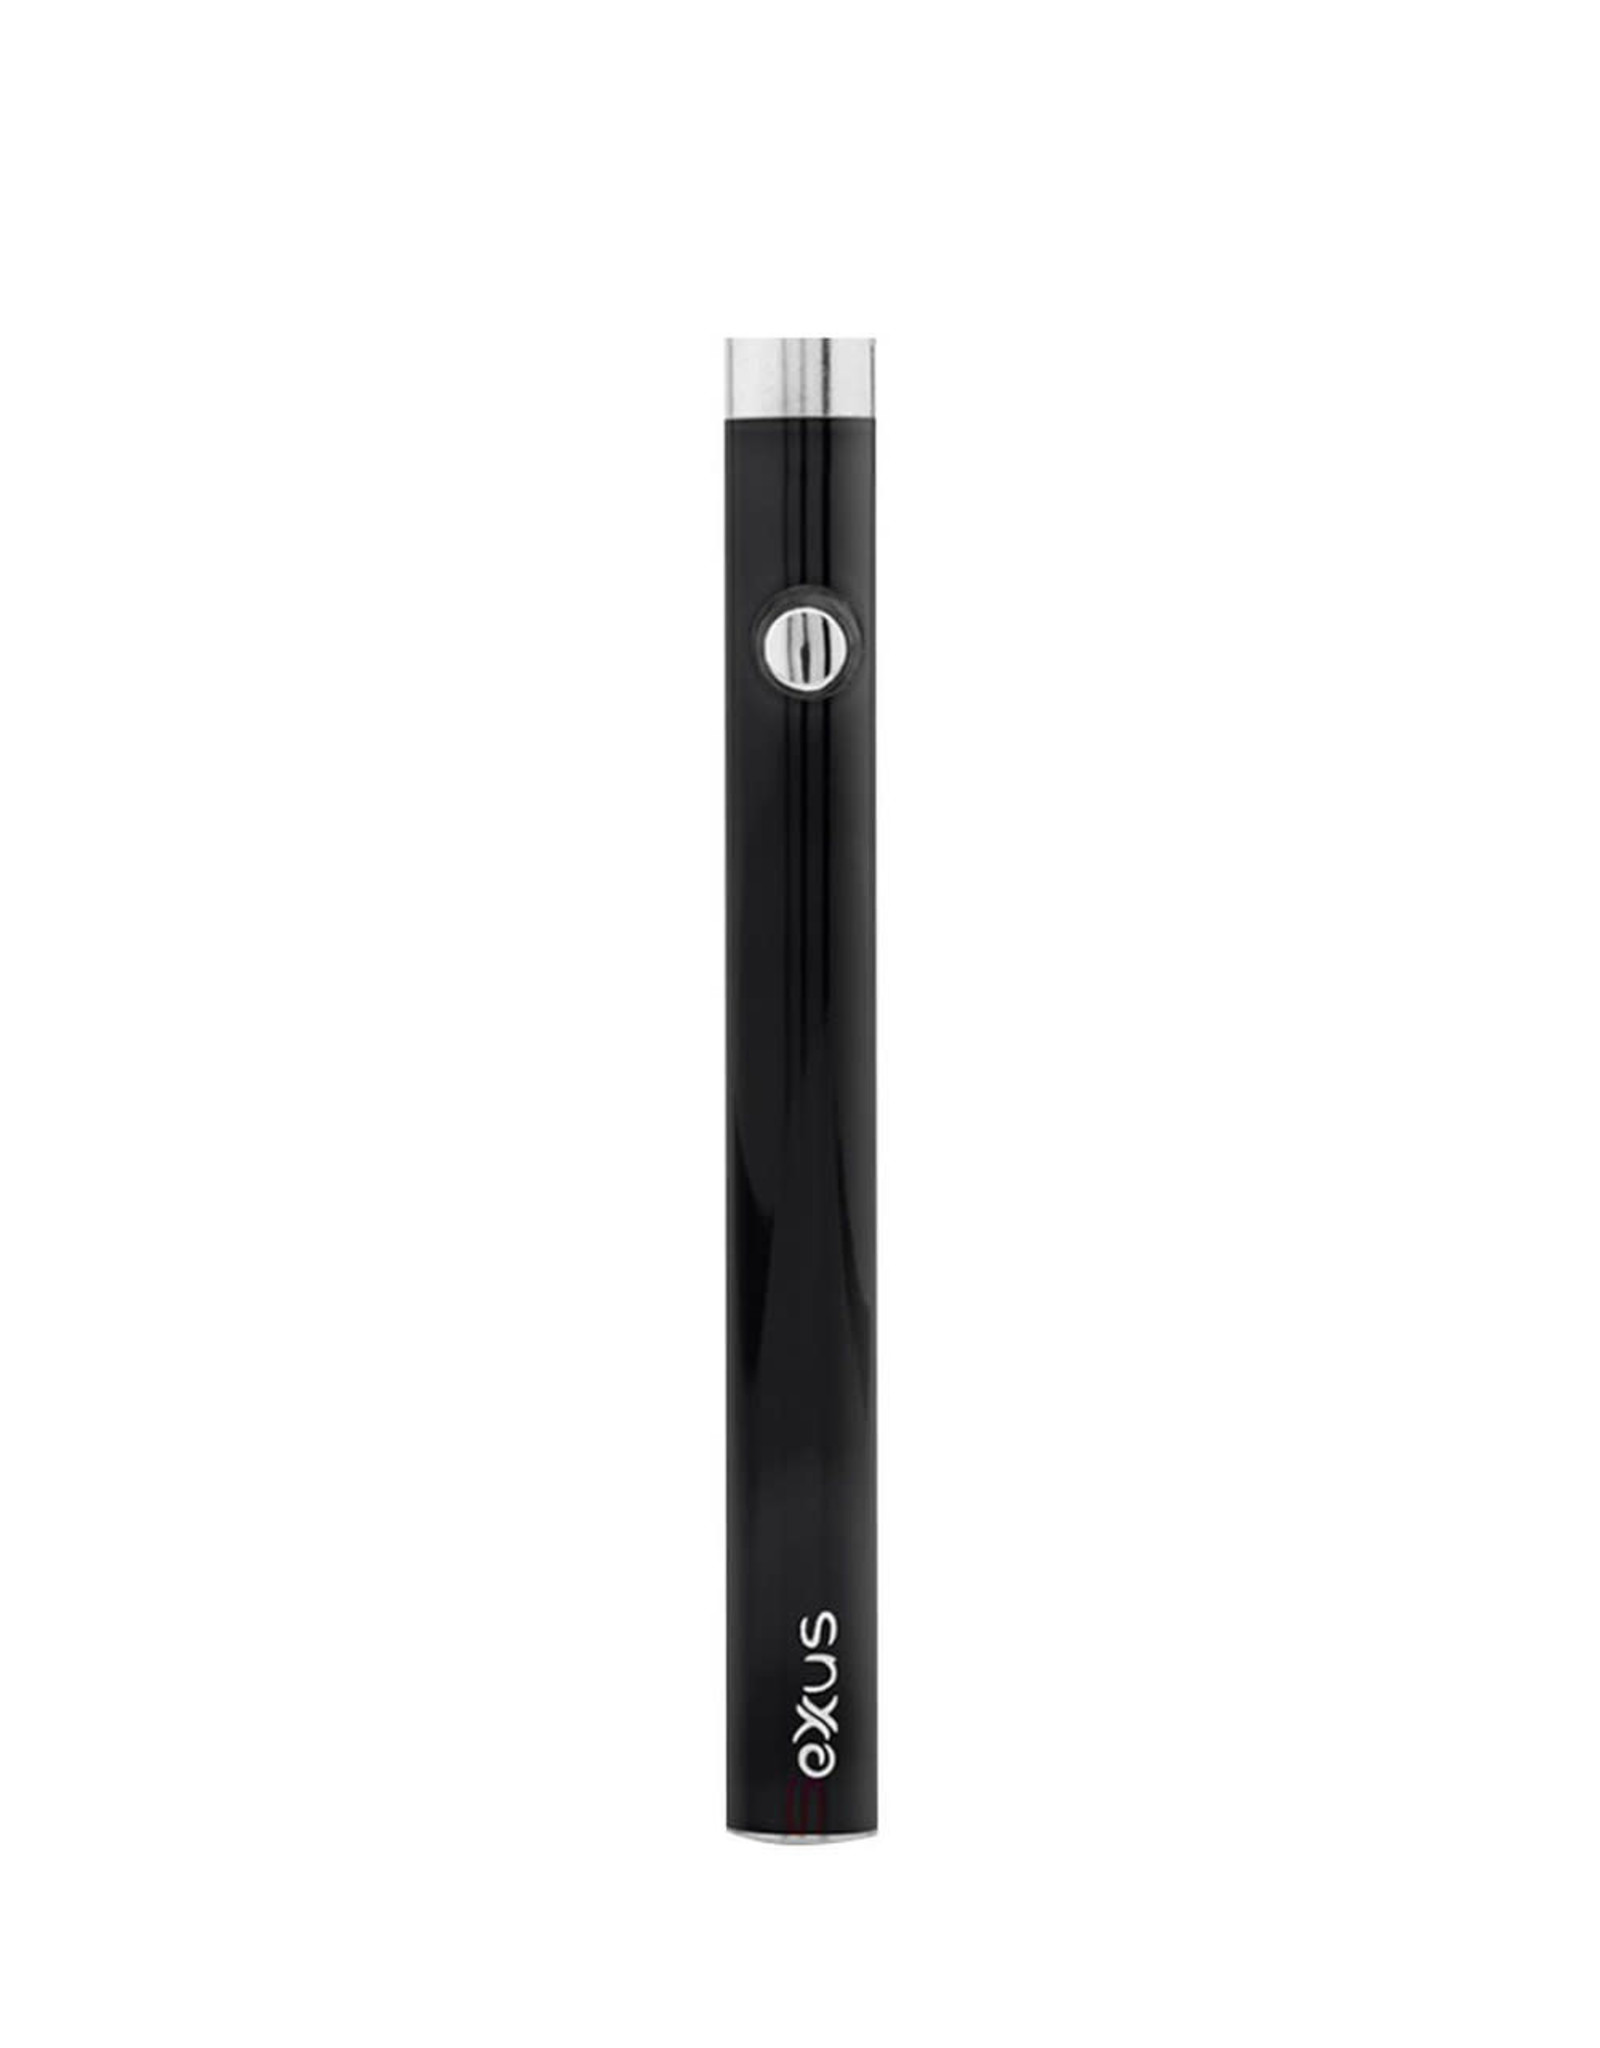 Exxus Slim Variable Voltage Battery for Ccell Cartridges